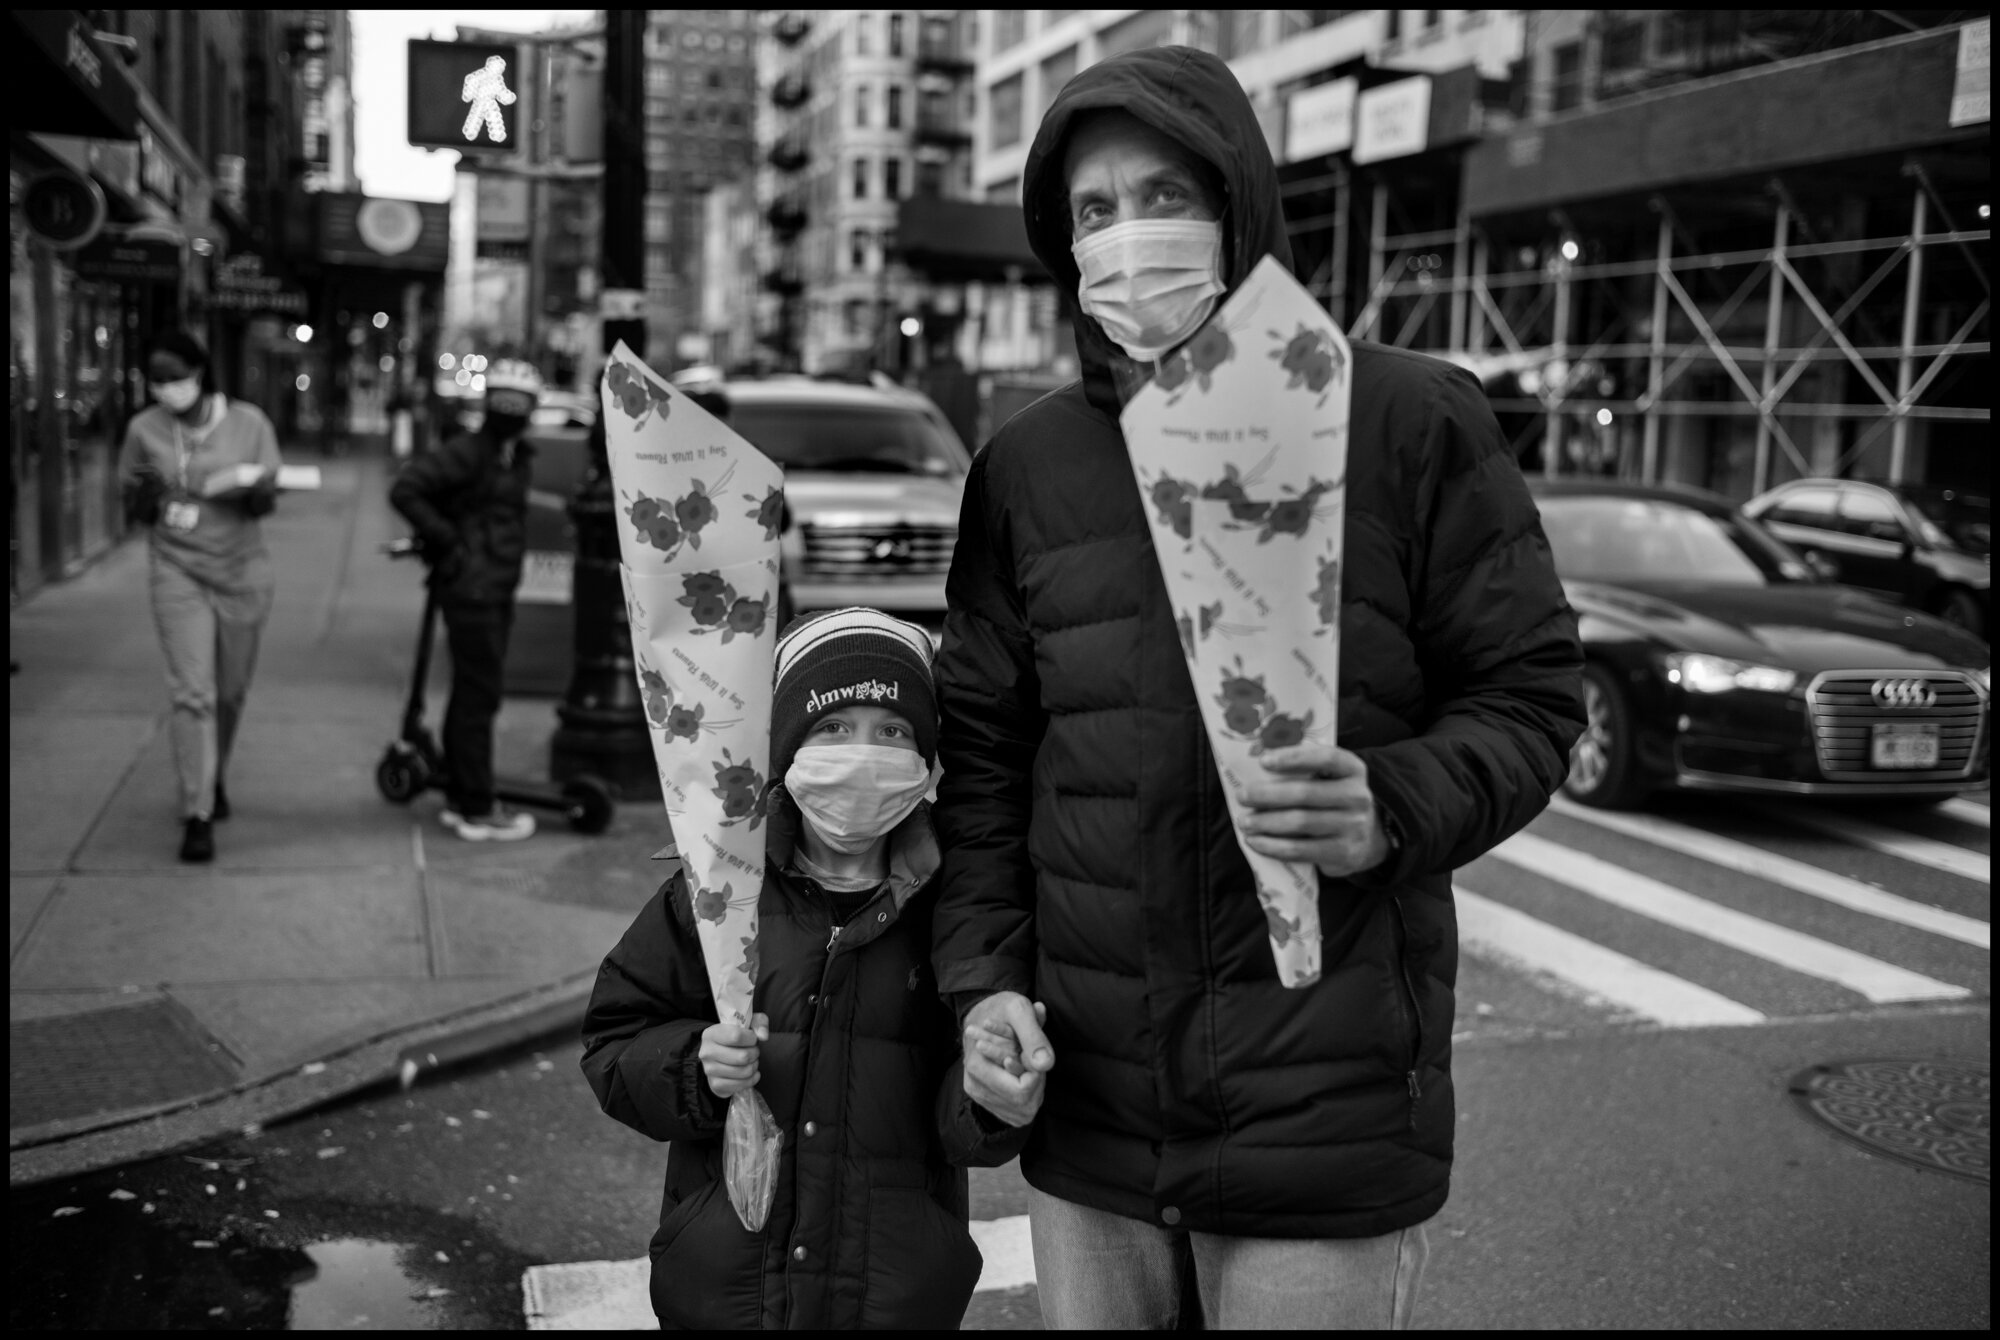  The night before Mother’s Day, a father, Mike, and his son, Alexander, pass by the corner of 77th and Lexington with flowers in their hand for Alexander’s mother, Anastasia.   May 9, 2020. © Peter Turnley.   ID# 42-004 